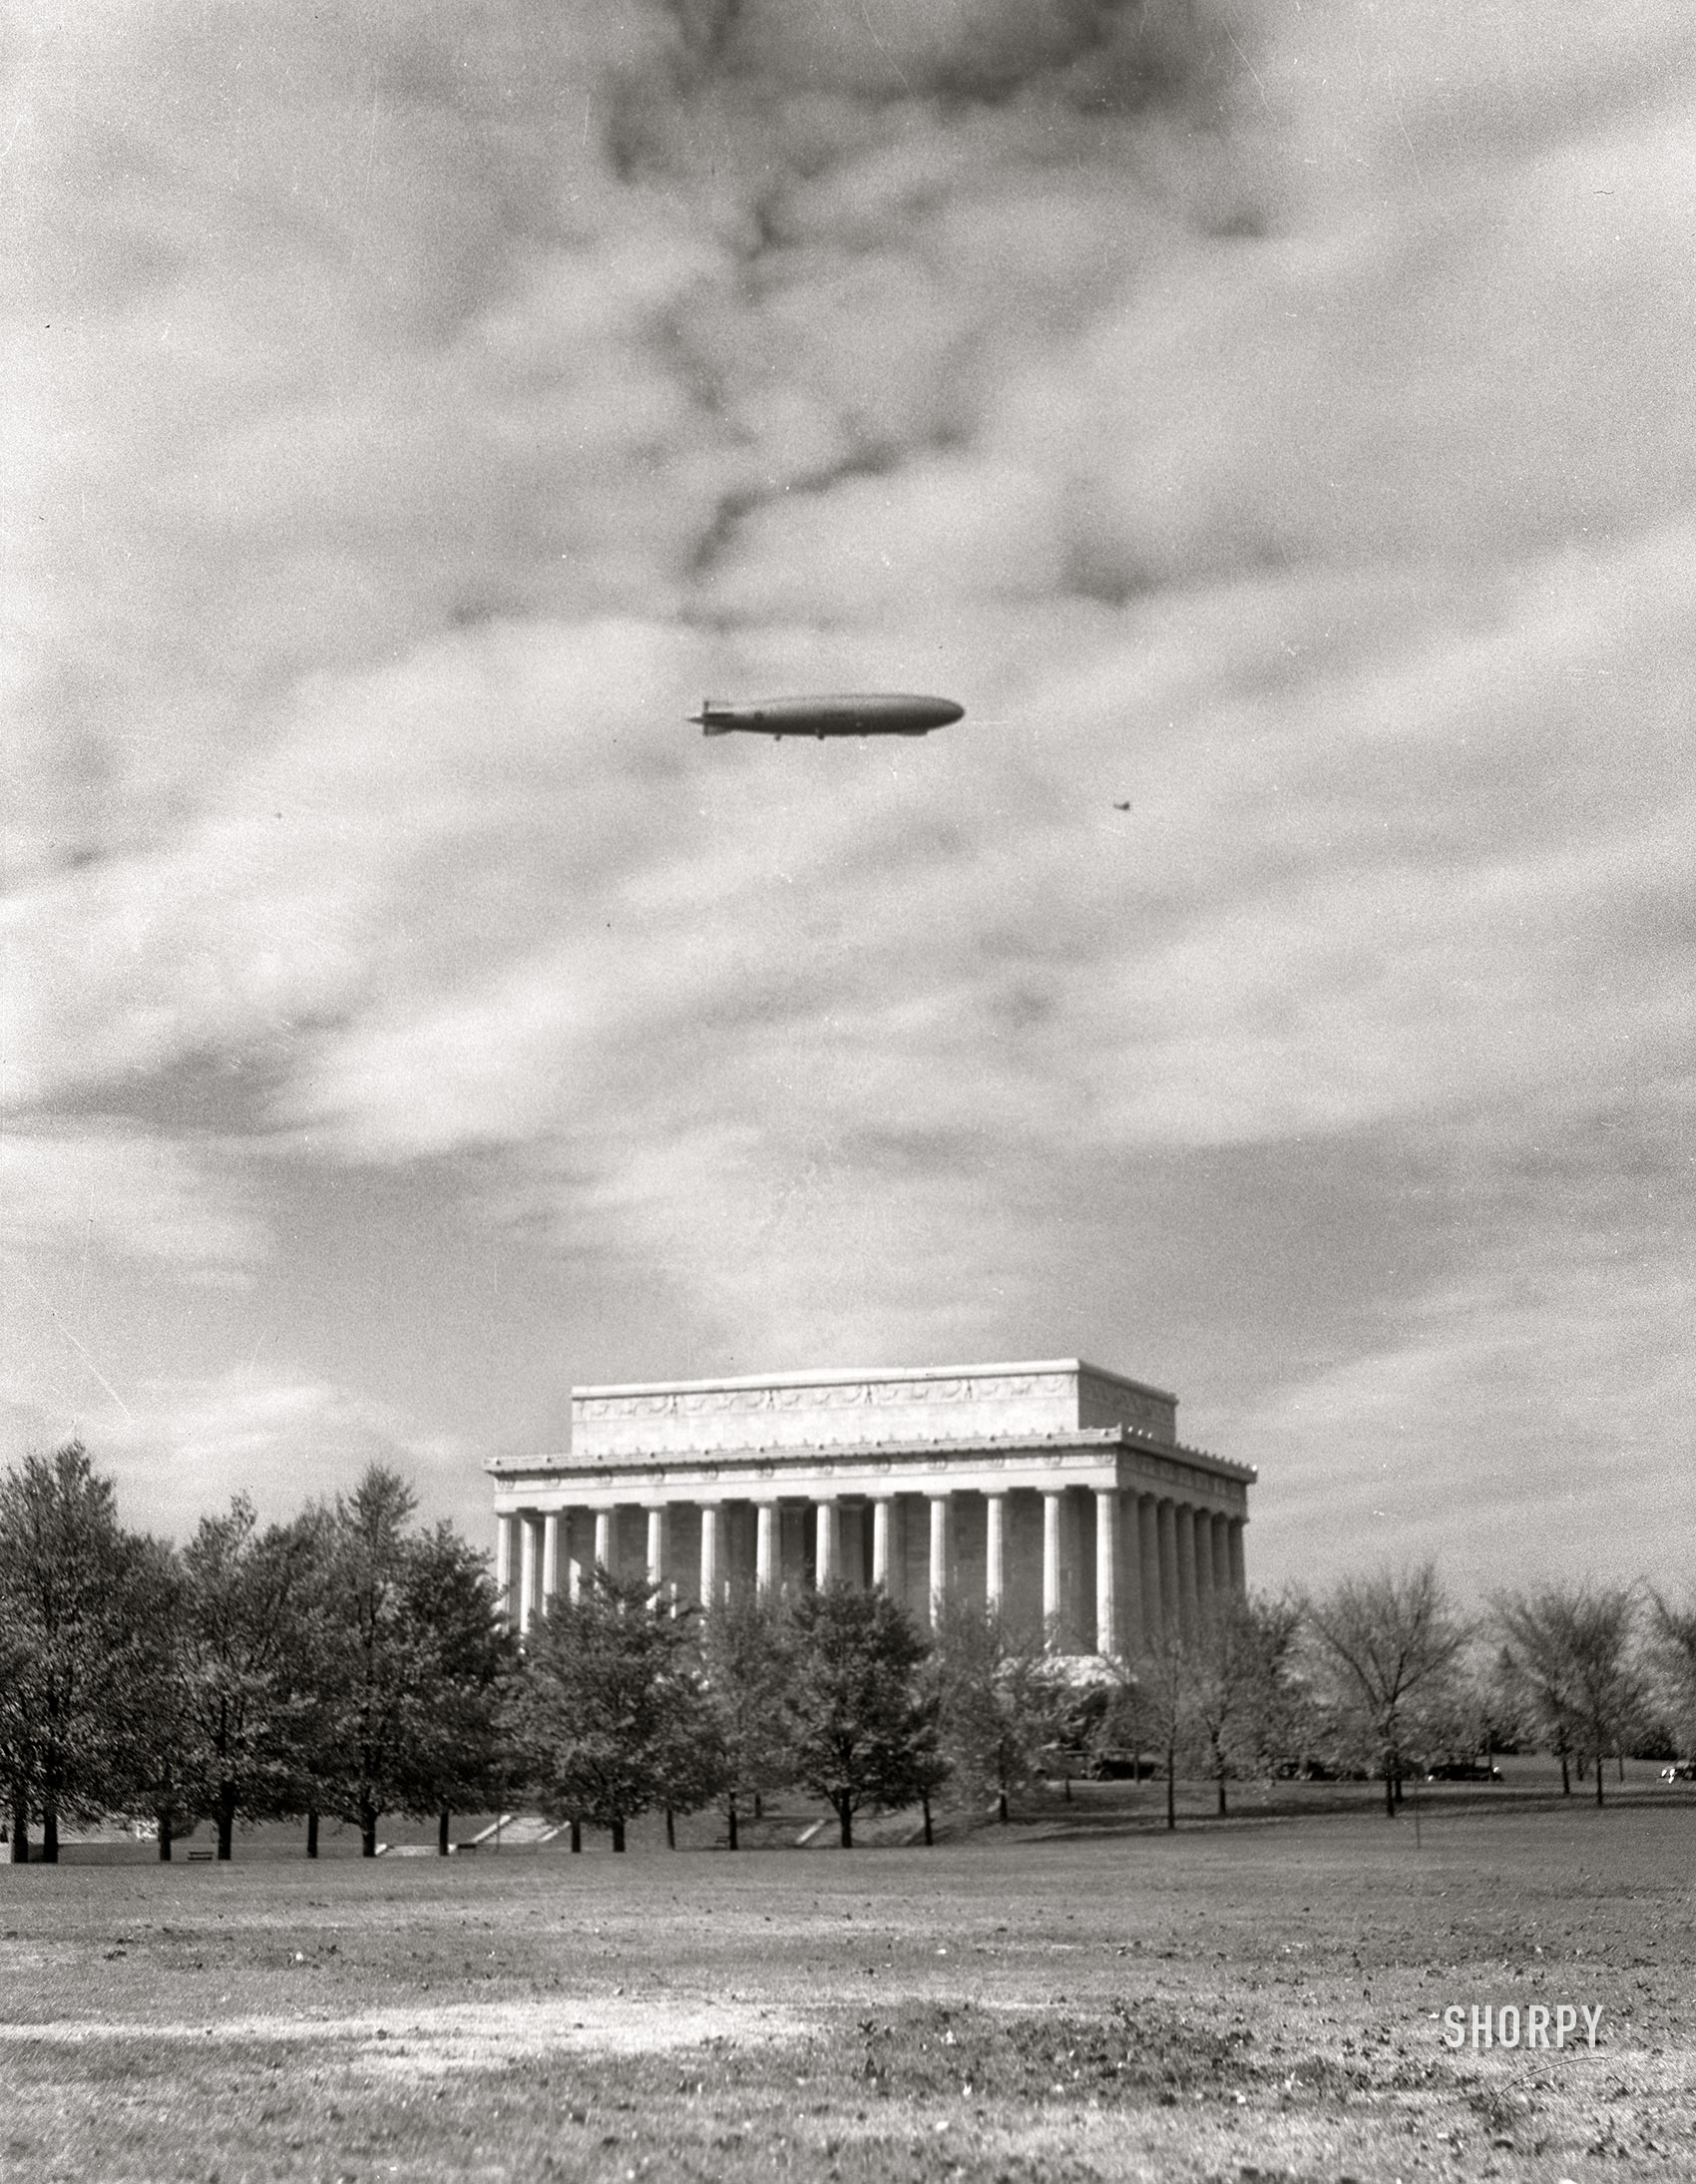 &nbsp; &nbsp; &nbsp; &nbsp; UPDATE: The aviation experts among us aver that the photo shows the USS Los Angeles, not the Akron. In which case the date would be November 2, 1931, when both airships overflew the capital.
August 19, 1932. The Lincoln Memorial in Washington, D.C. "The Navy airship Akron appeared in the morning and after circling the city released several of her small fighting airplanes over Hoover Field. These were later drawn into the hangar constructed on the interior of the airship." 4x5 inch nitrate negative by Theodor Horydczak. View full size.